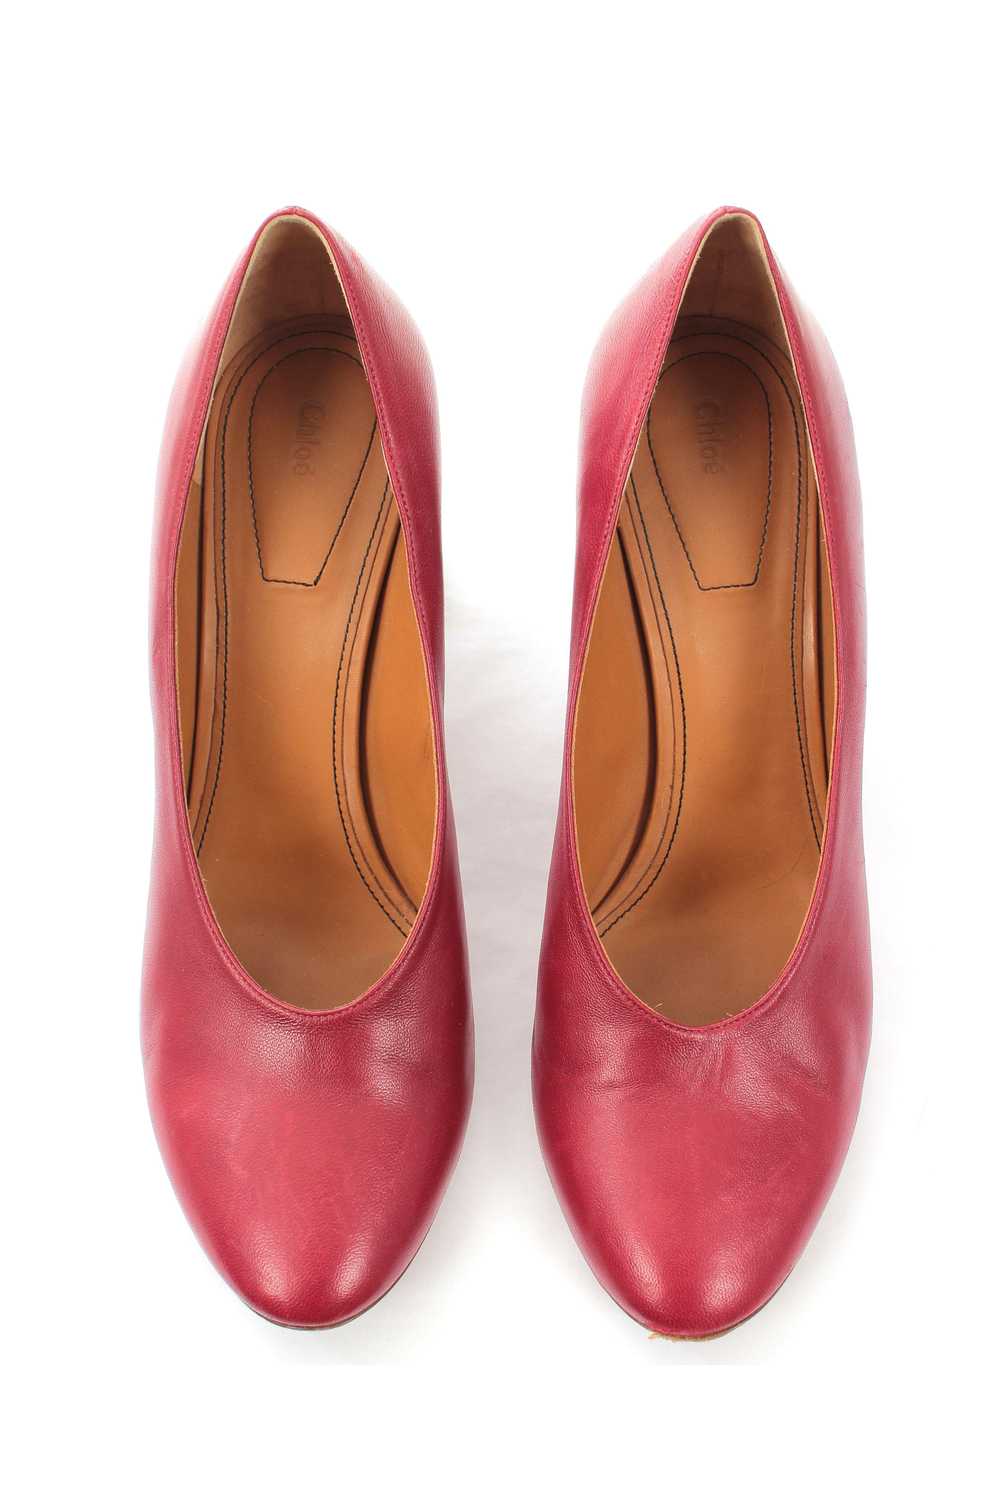 Chloe Red leather wooden block heeled pumps - image 2